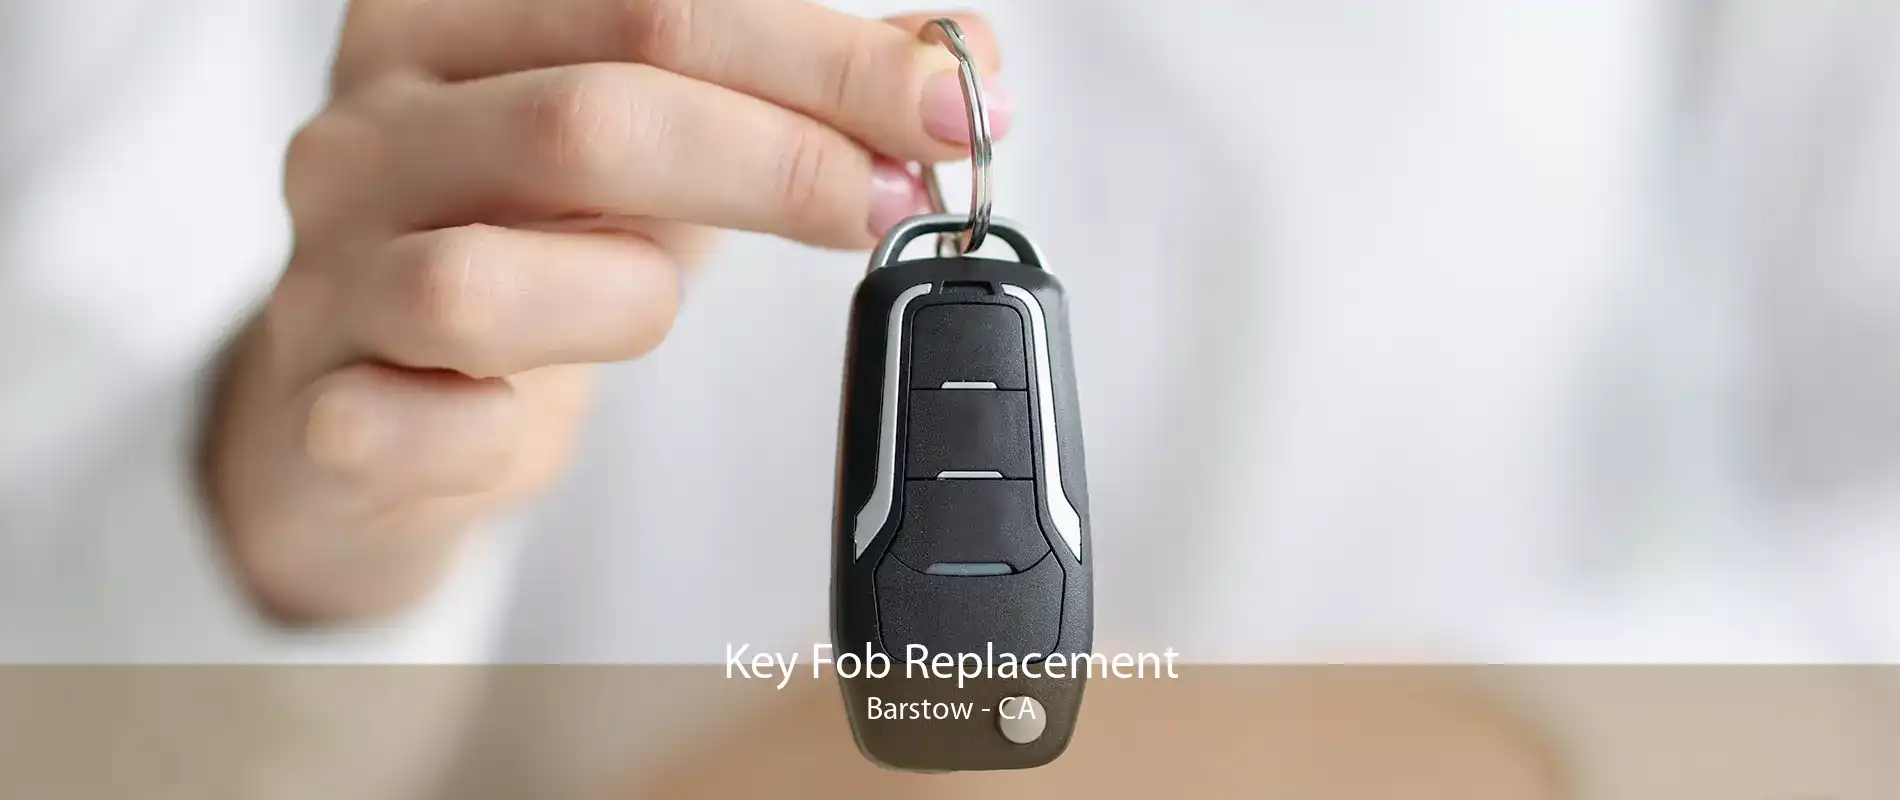 Key Fob Replacement Barstow - CA